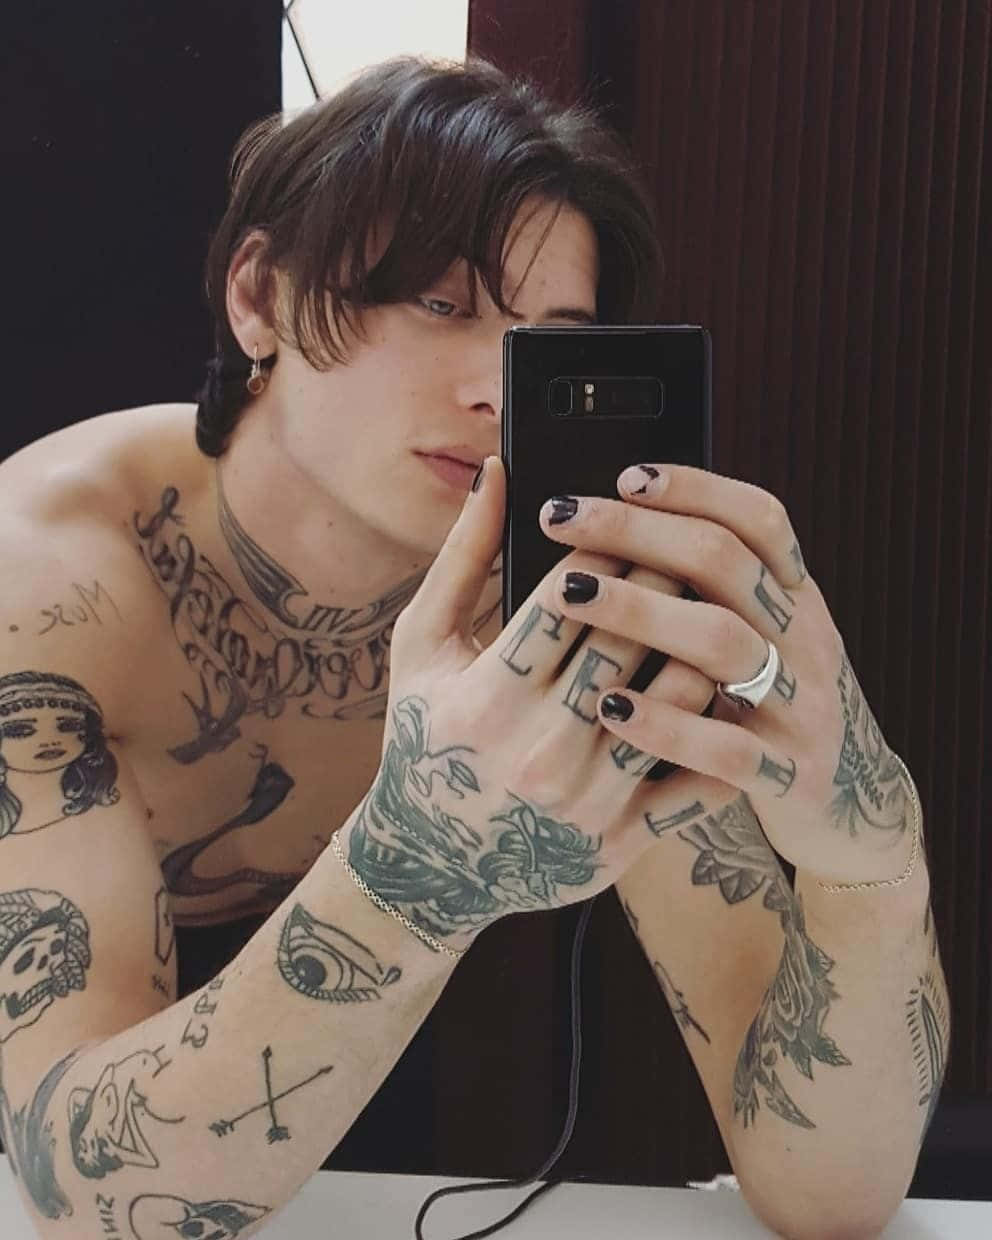 A Man With Tattoos Taking A Selfie